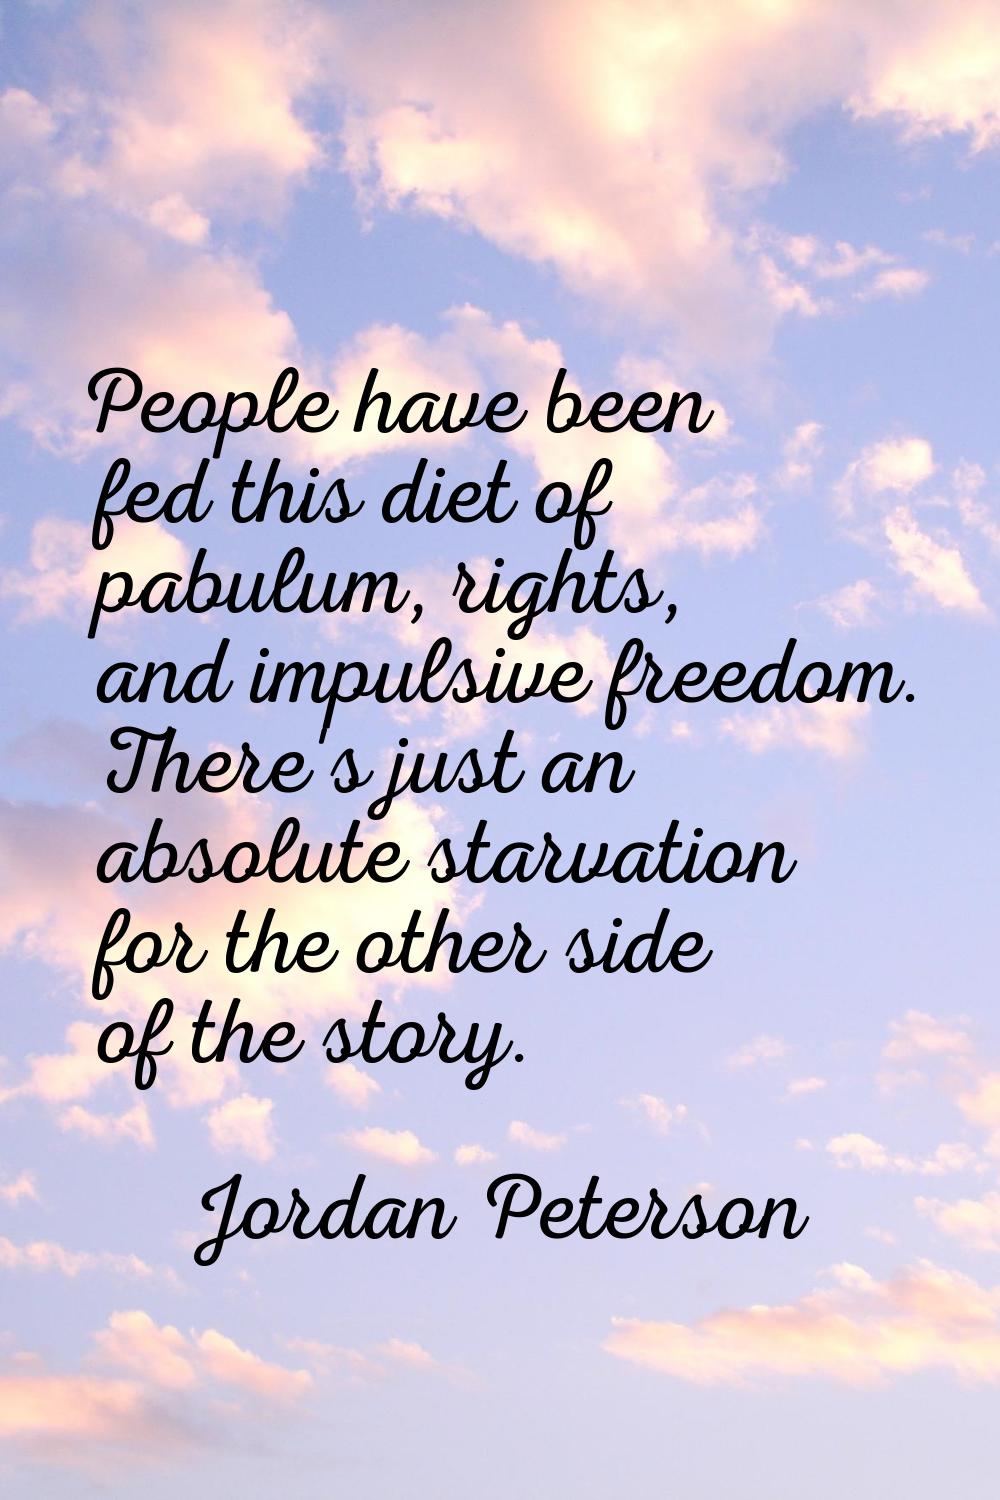 People have been fed this diet of pabulum, rights, and impulsive freedom. There's just an absolute 